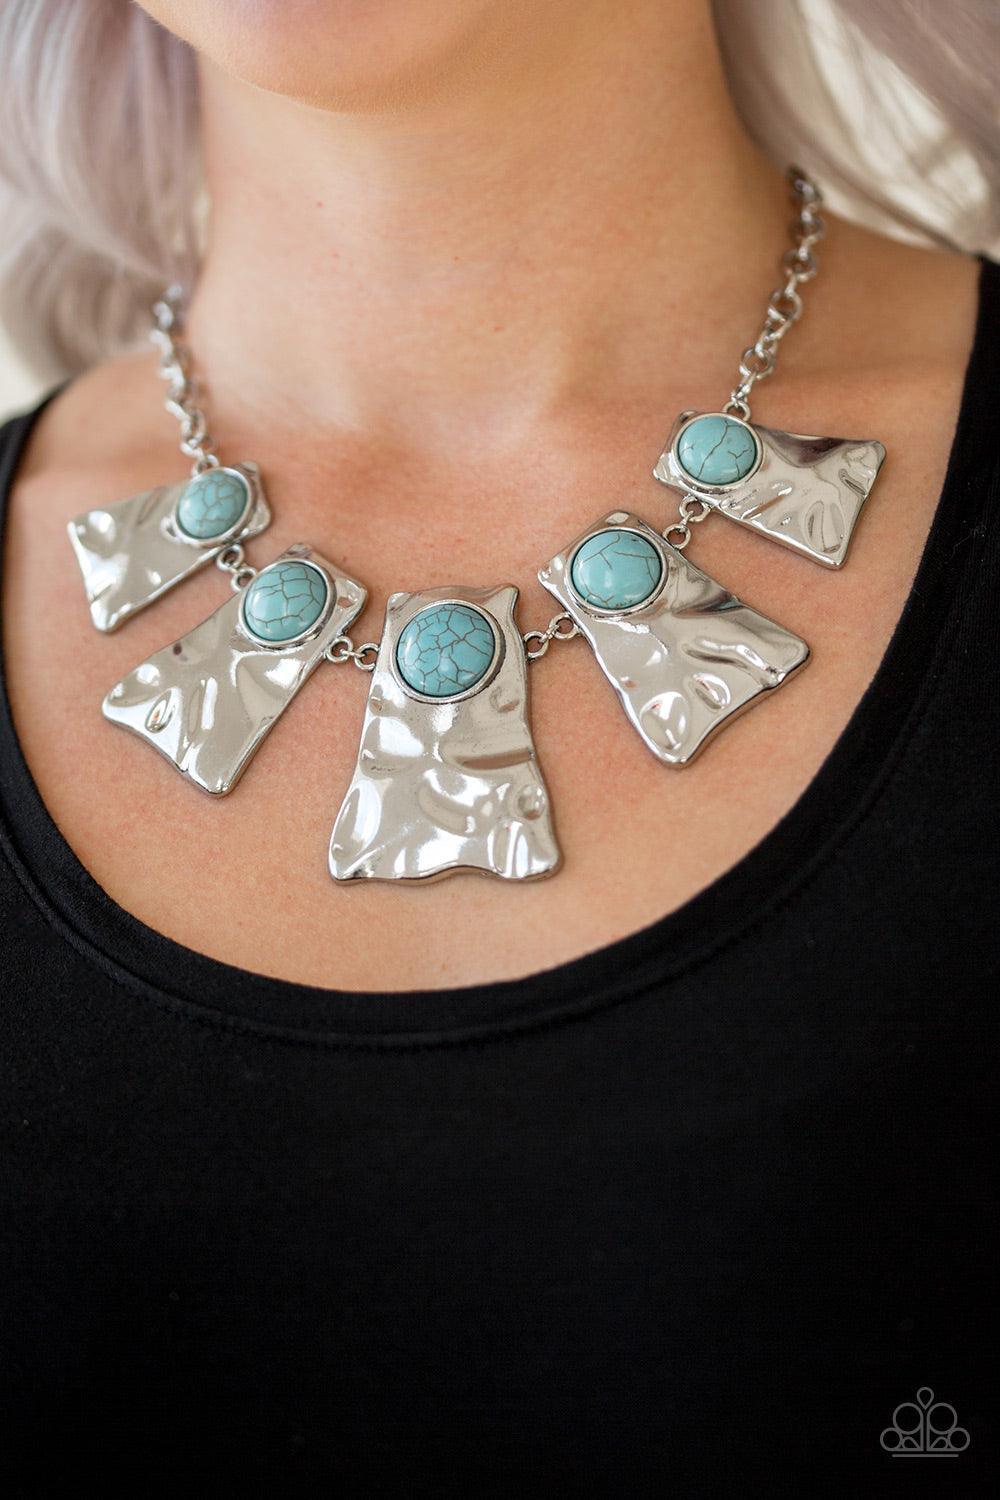 Paparazzi Accessories - Cougar - Blue (Turquoise) Necklace